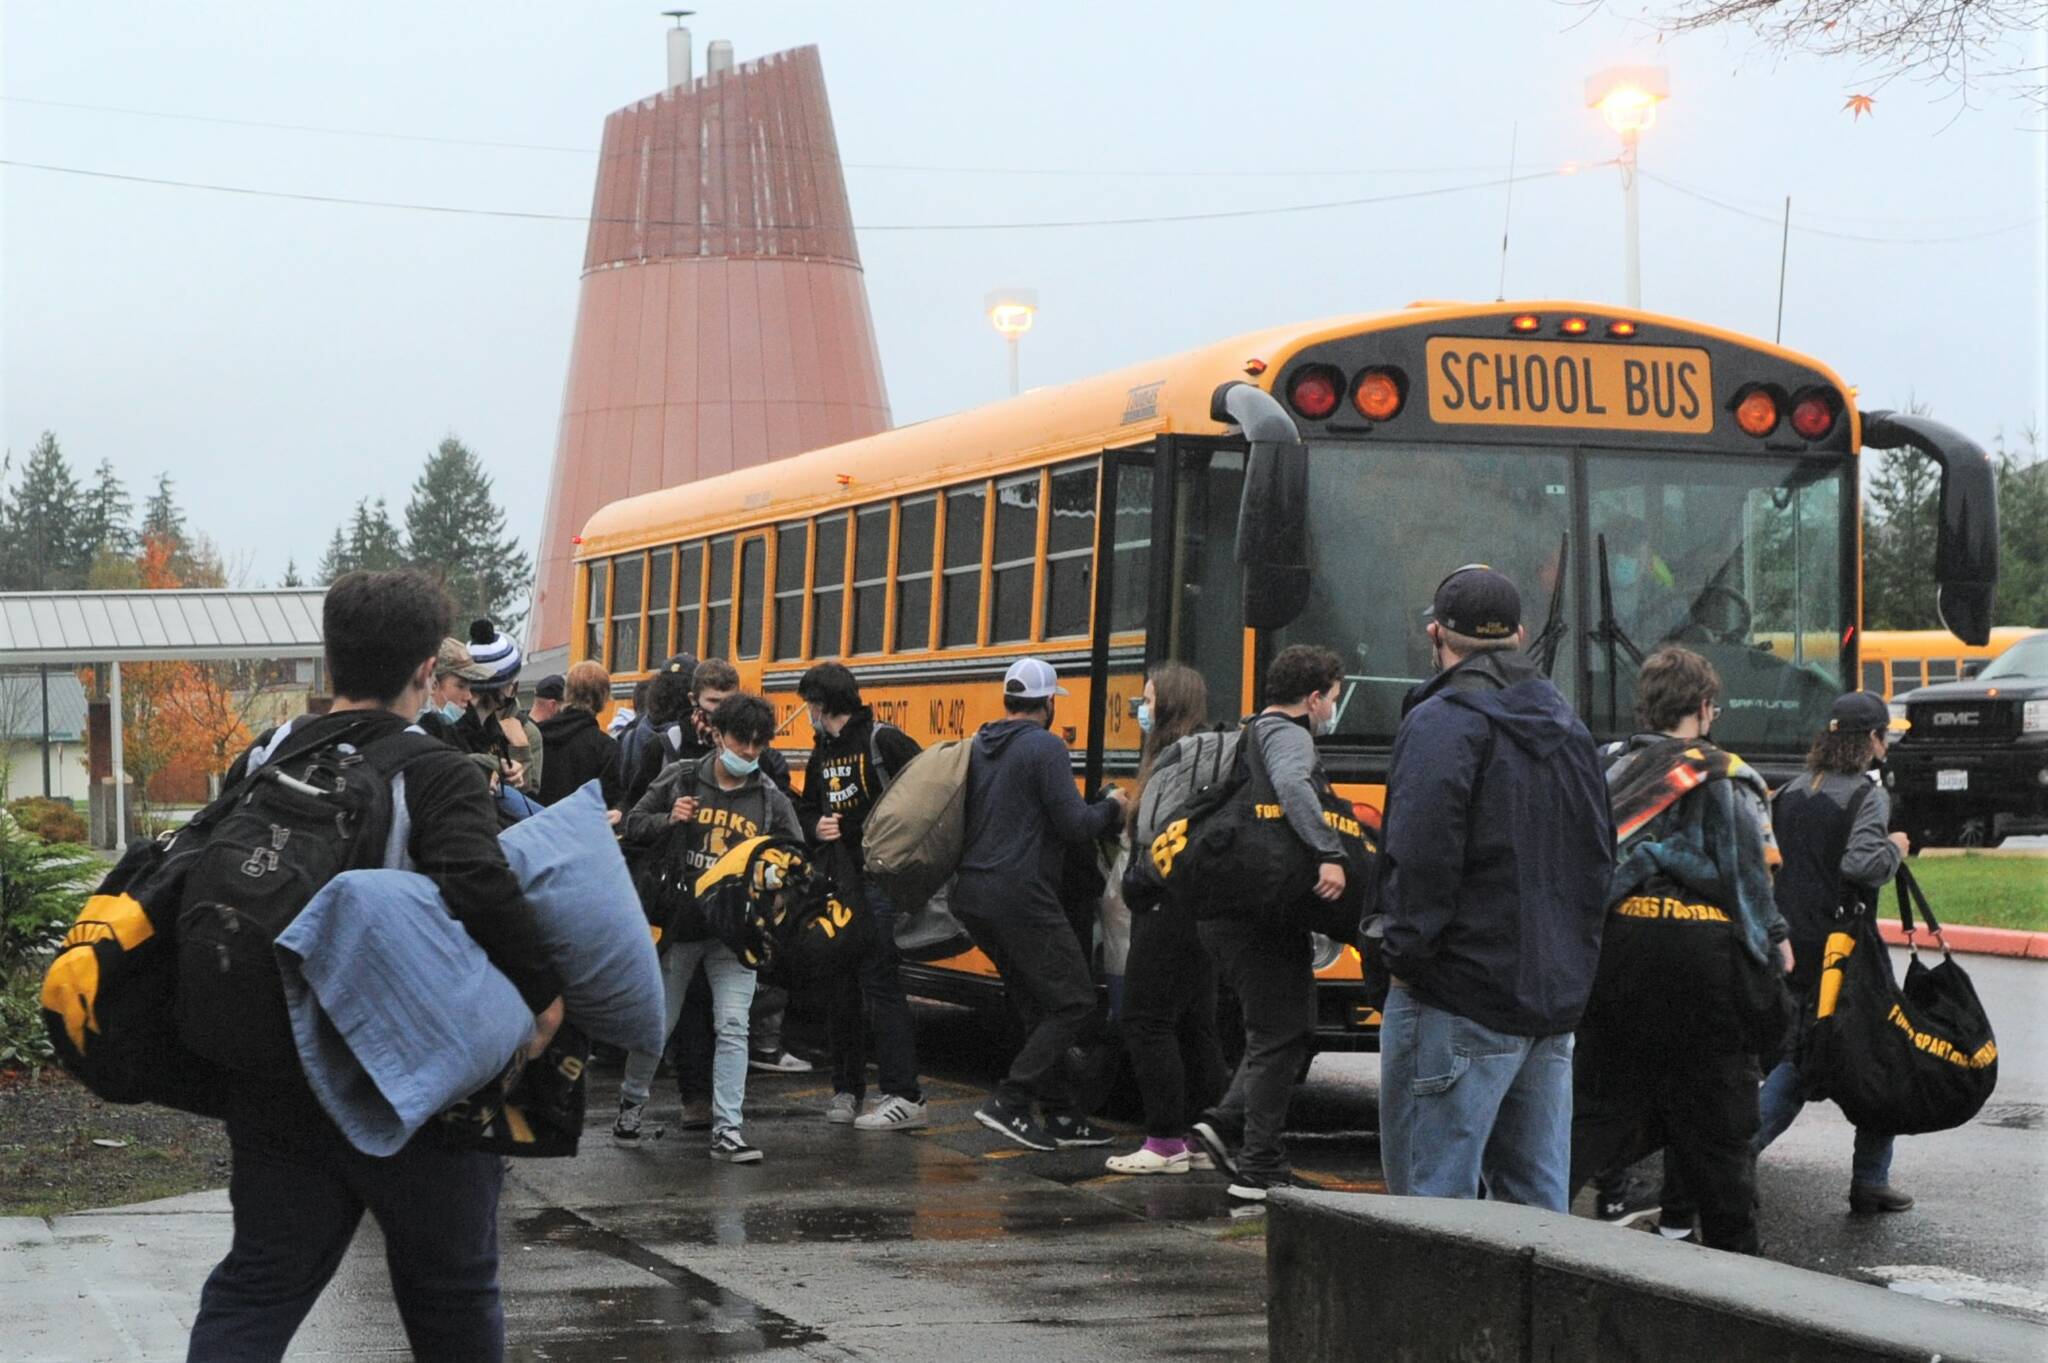 Spartans loading up Friday morning for the long bus ride to Goldendale, WA, but first, they cruised through downtown Forks. Photo Lonnie Archibald